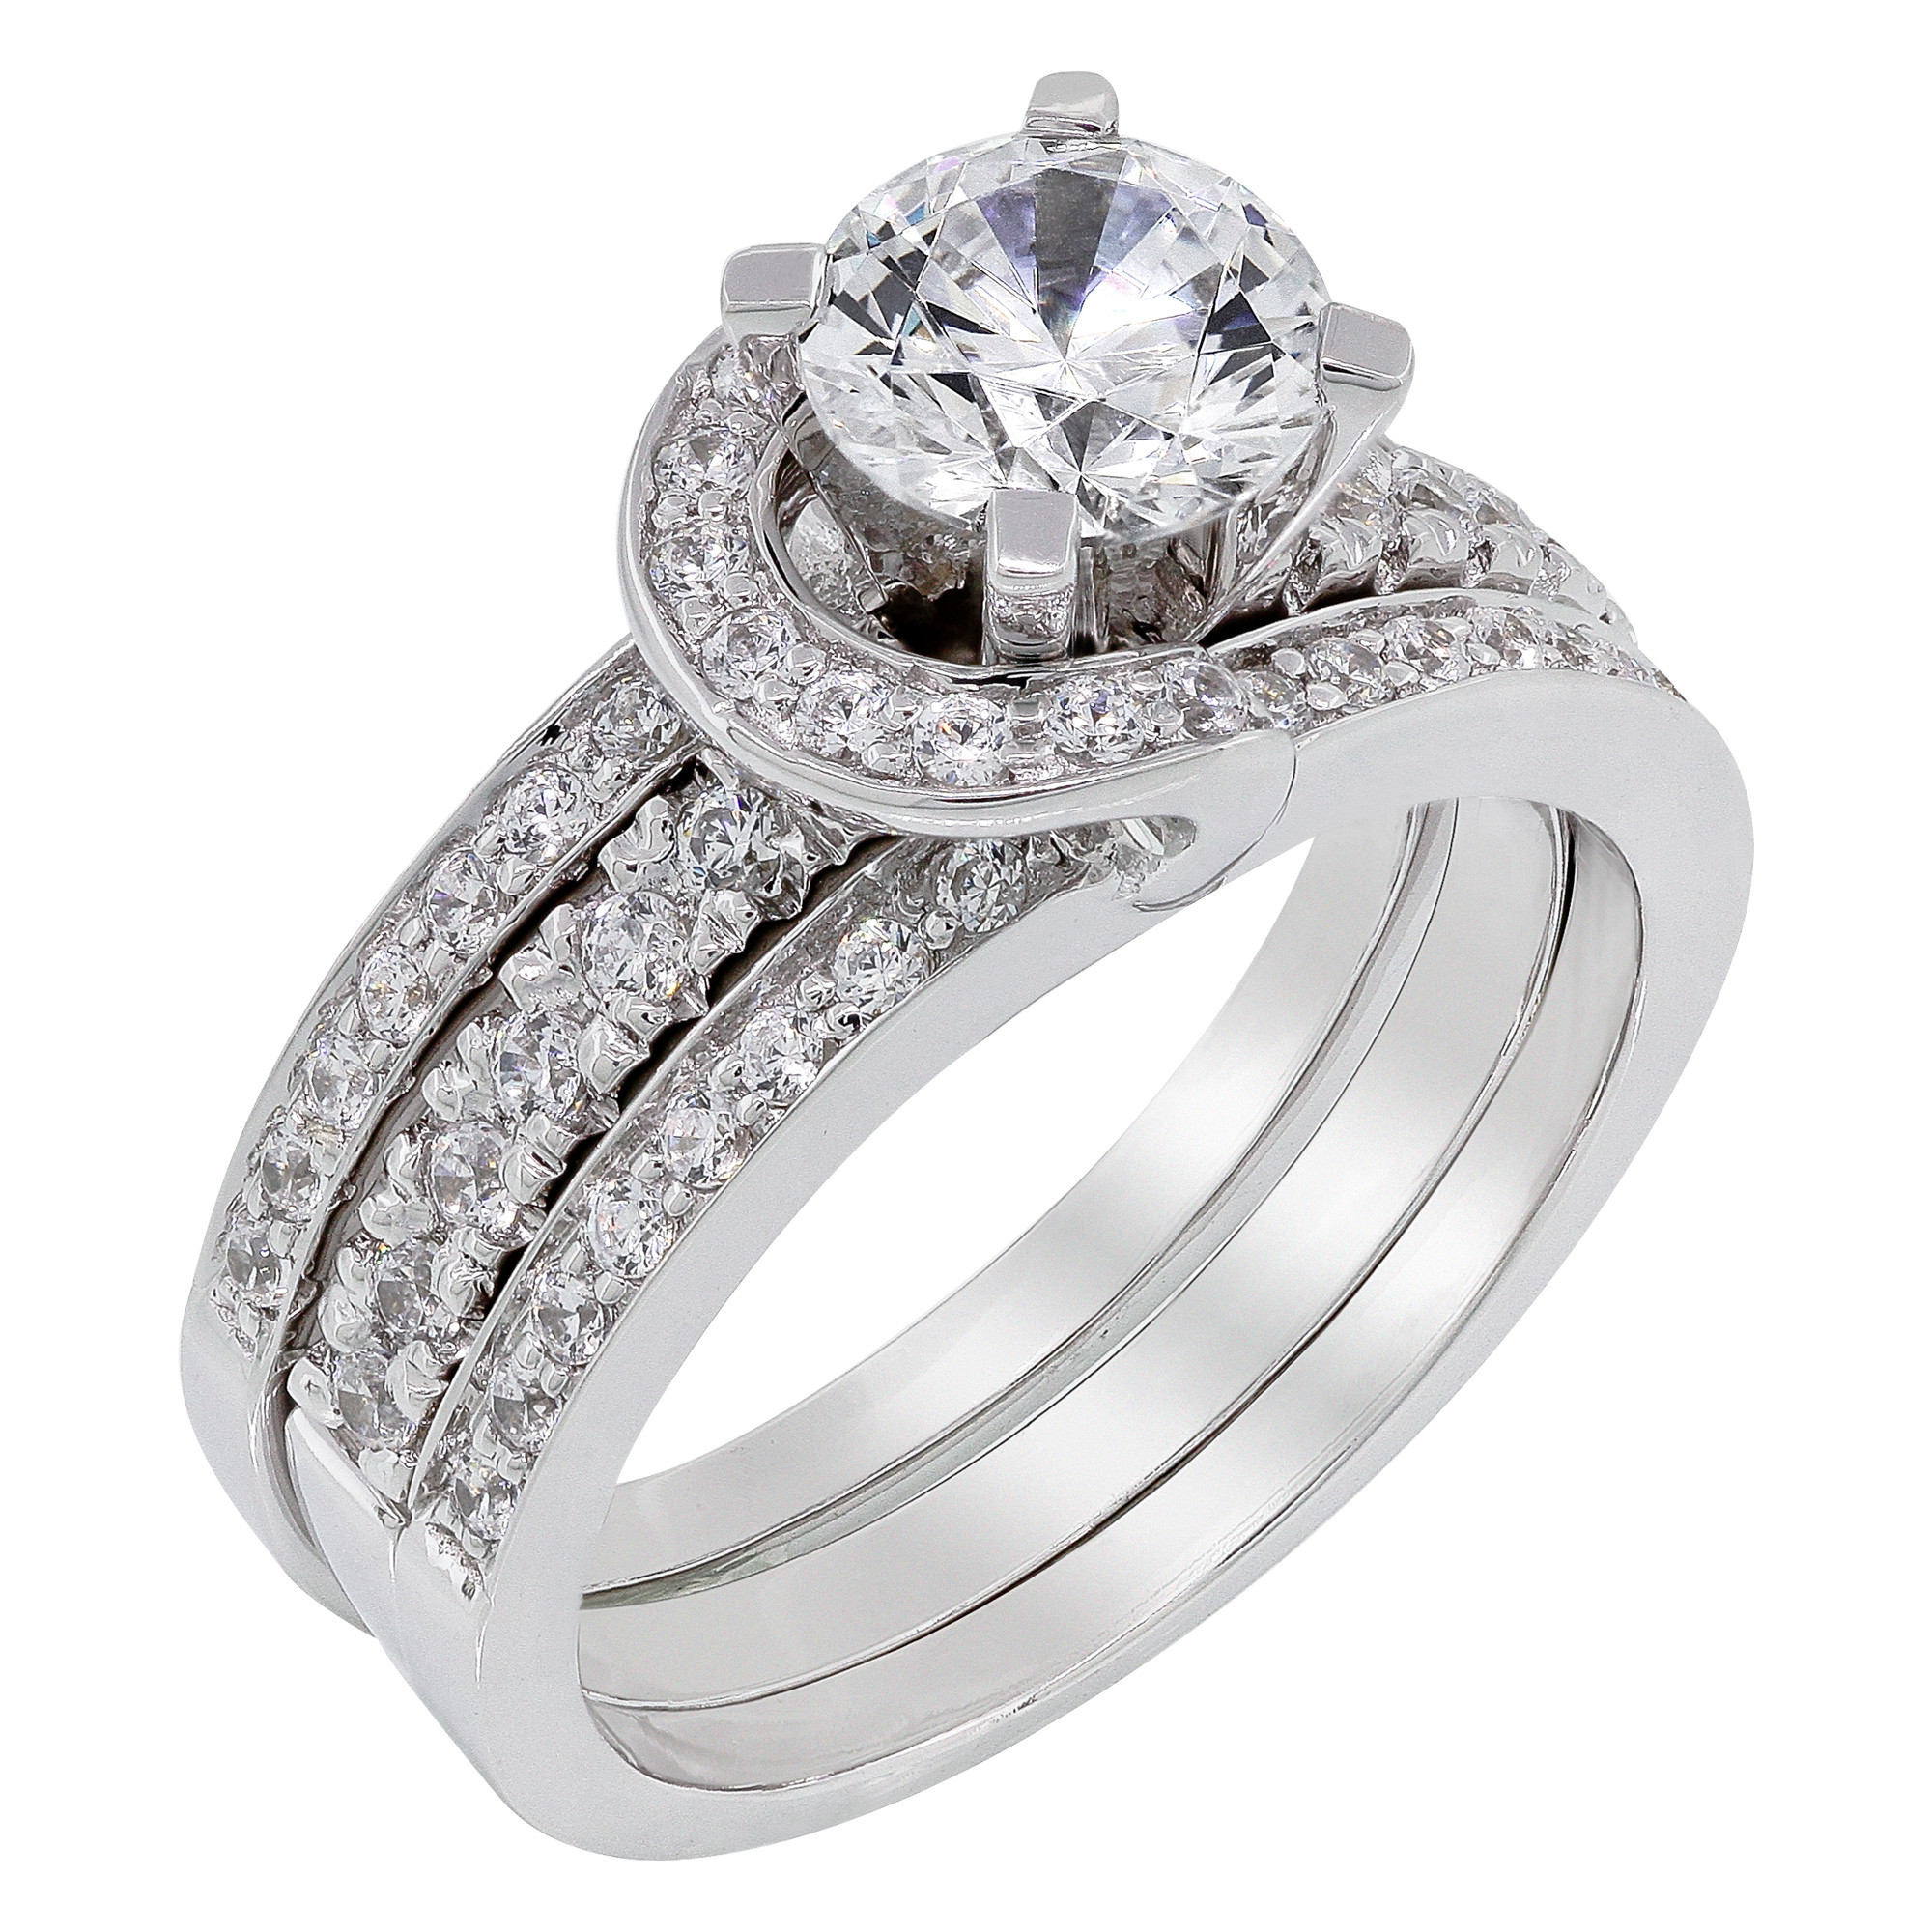 Diamond Band Engagement Ring
 Diamond Nexus Introduces New Engagement Ring Collection